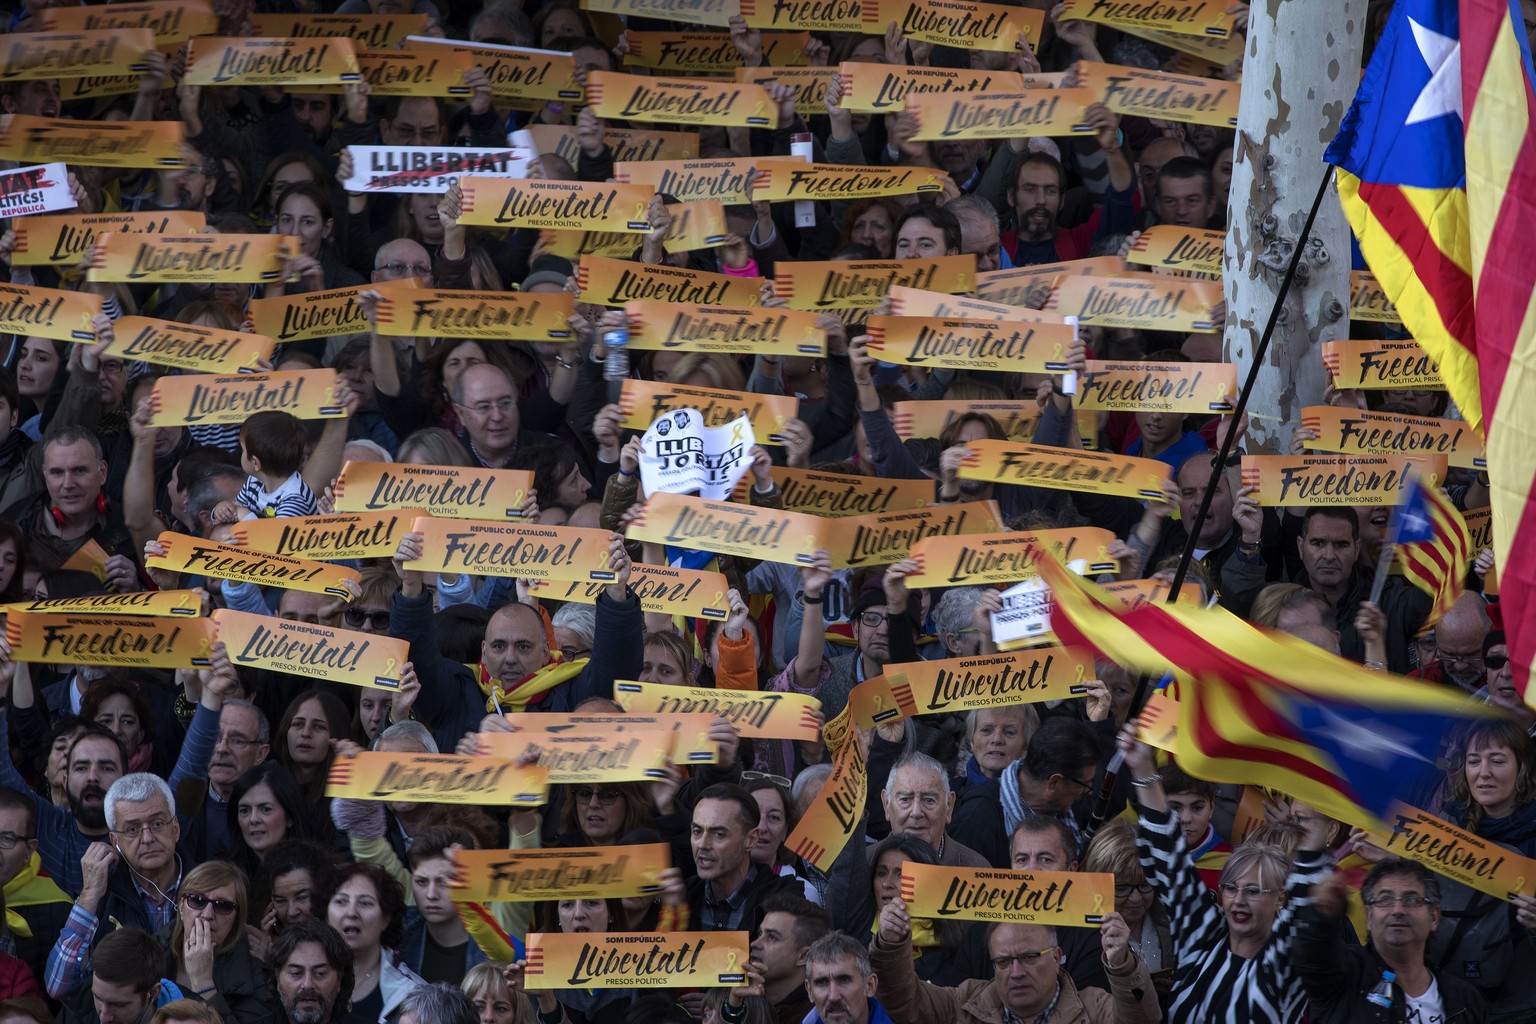 Demonstrators hold banners as they take part at a protest calling for the release of Catalan jailed politicians, in Barcelona, Spain, on Saturday, Nov 11, 2017. Eight members of the now-defunct Catala ...